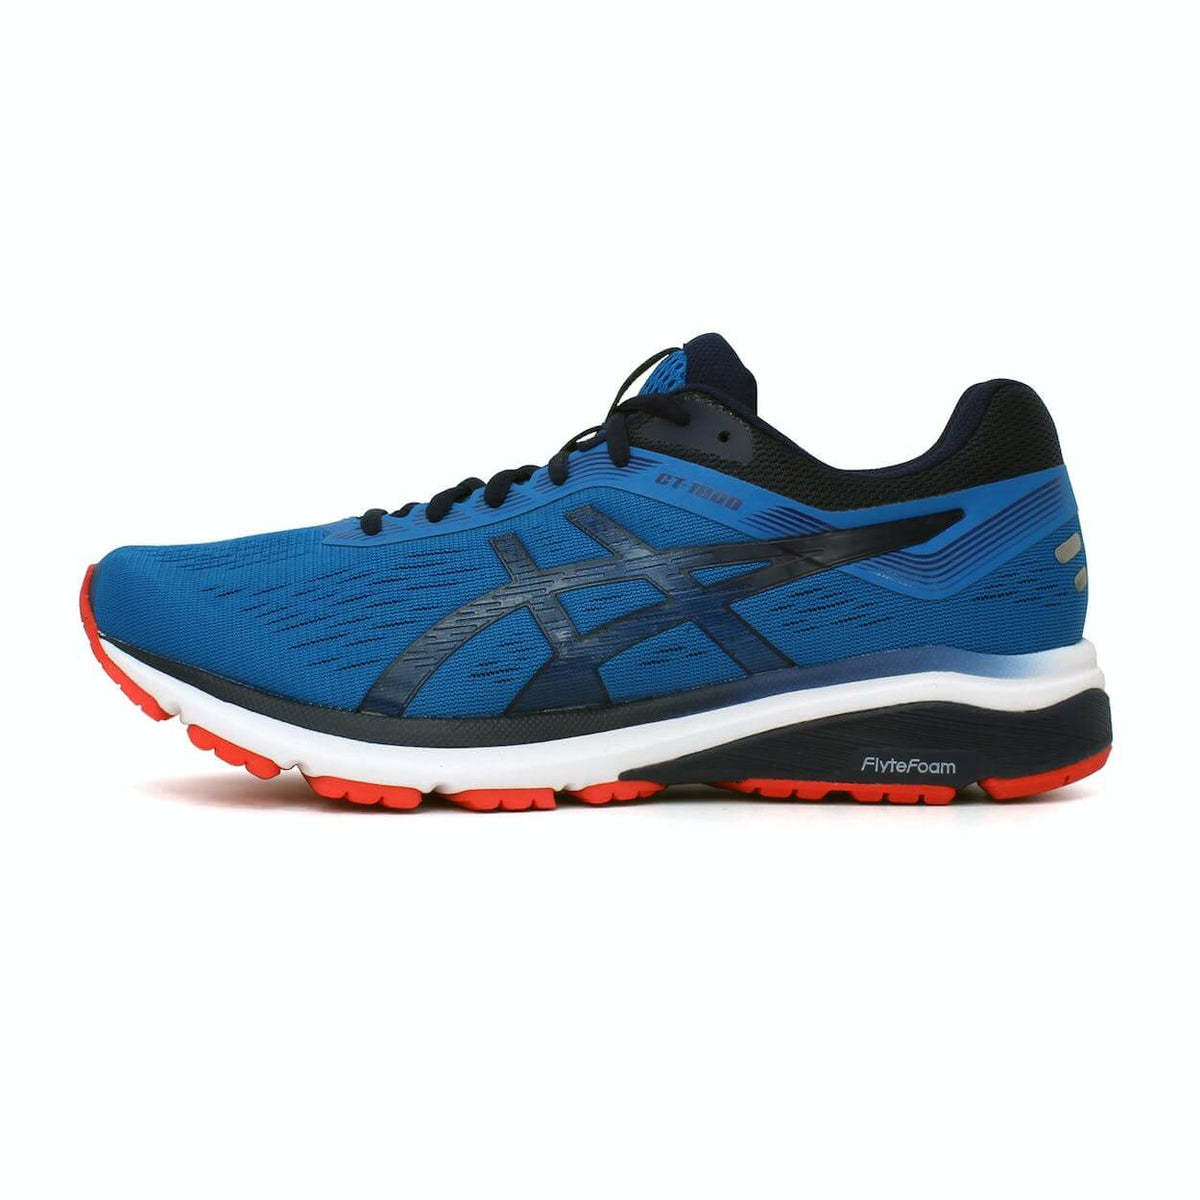 An image of the Asics GT-1000's in a blue and white colourway shown from the side.